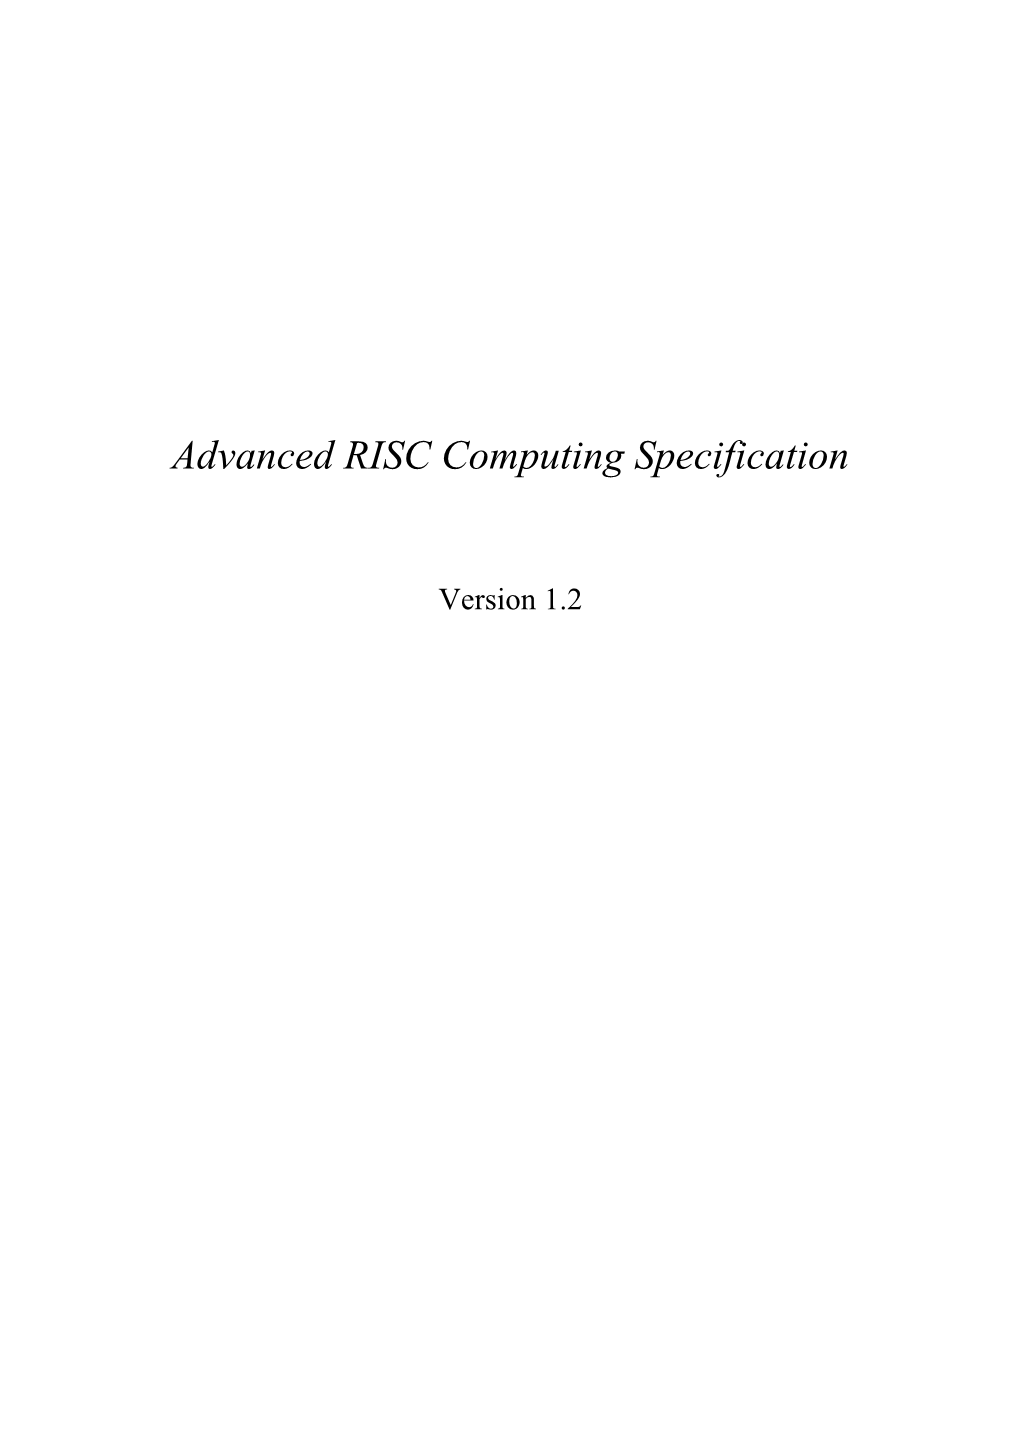 Advanced RISC Computing (ARC) Specification